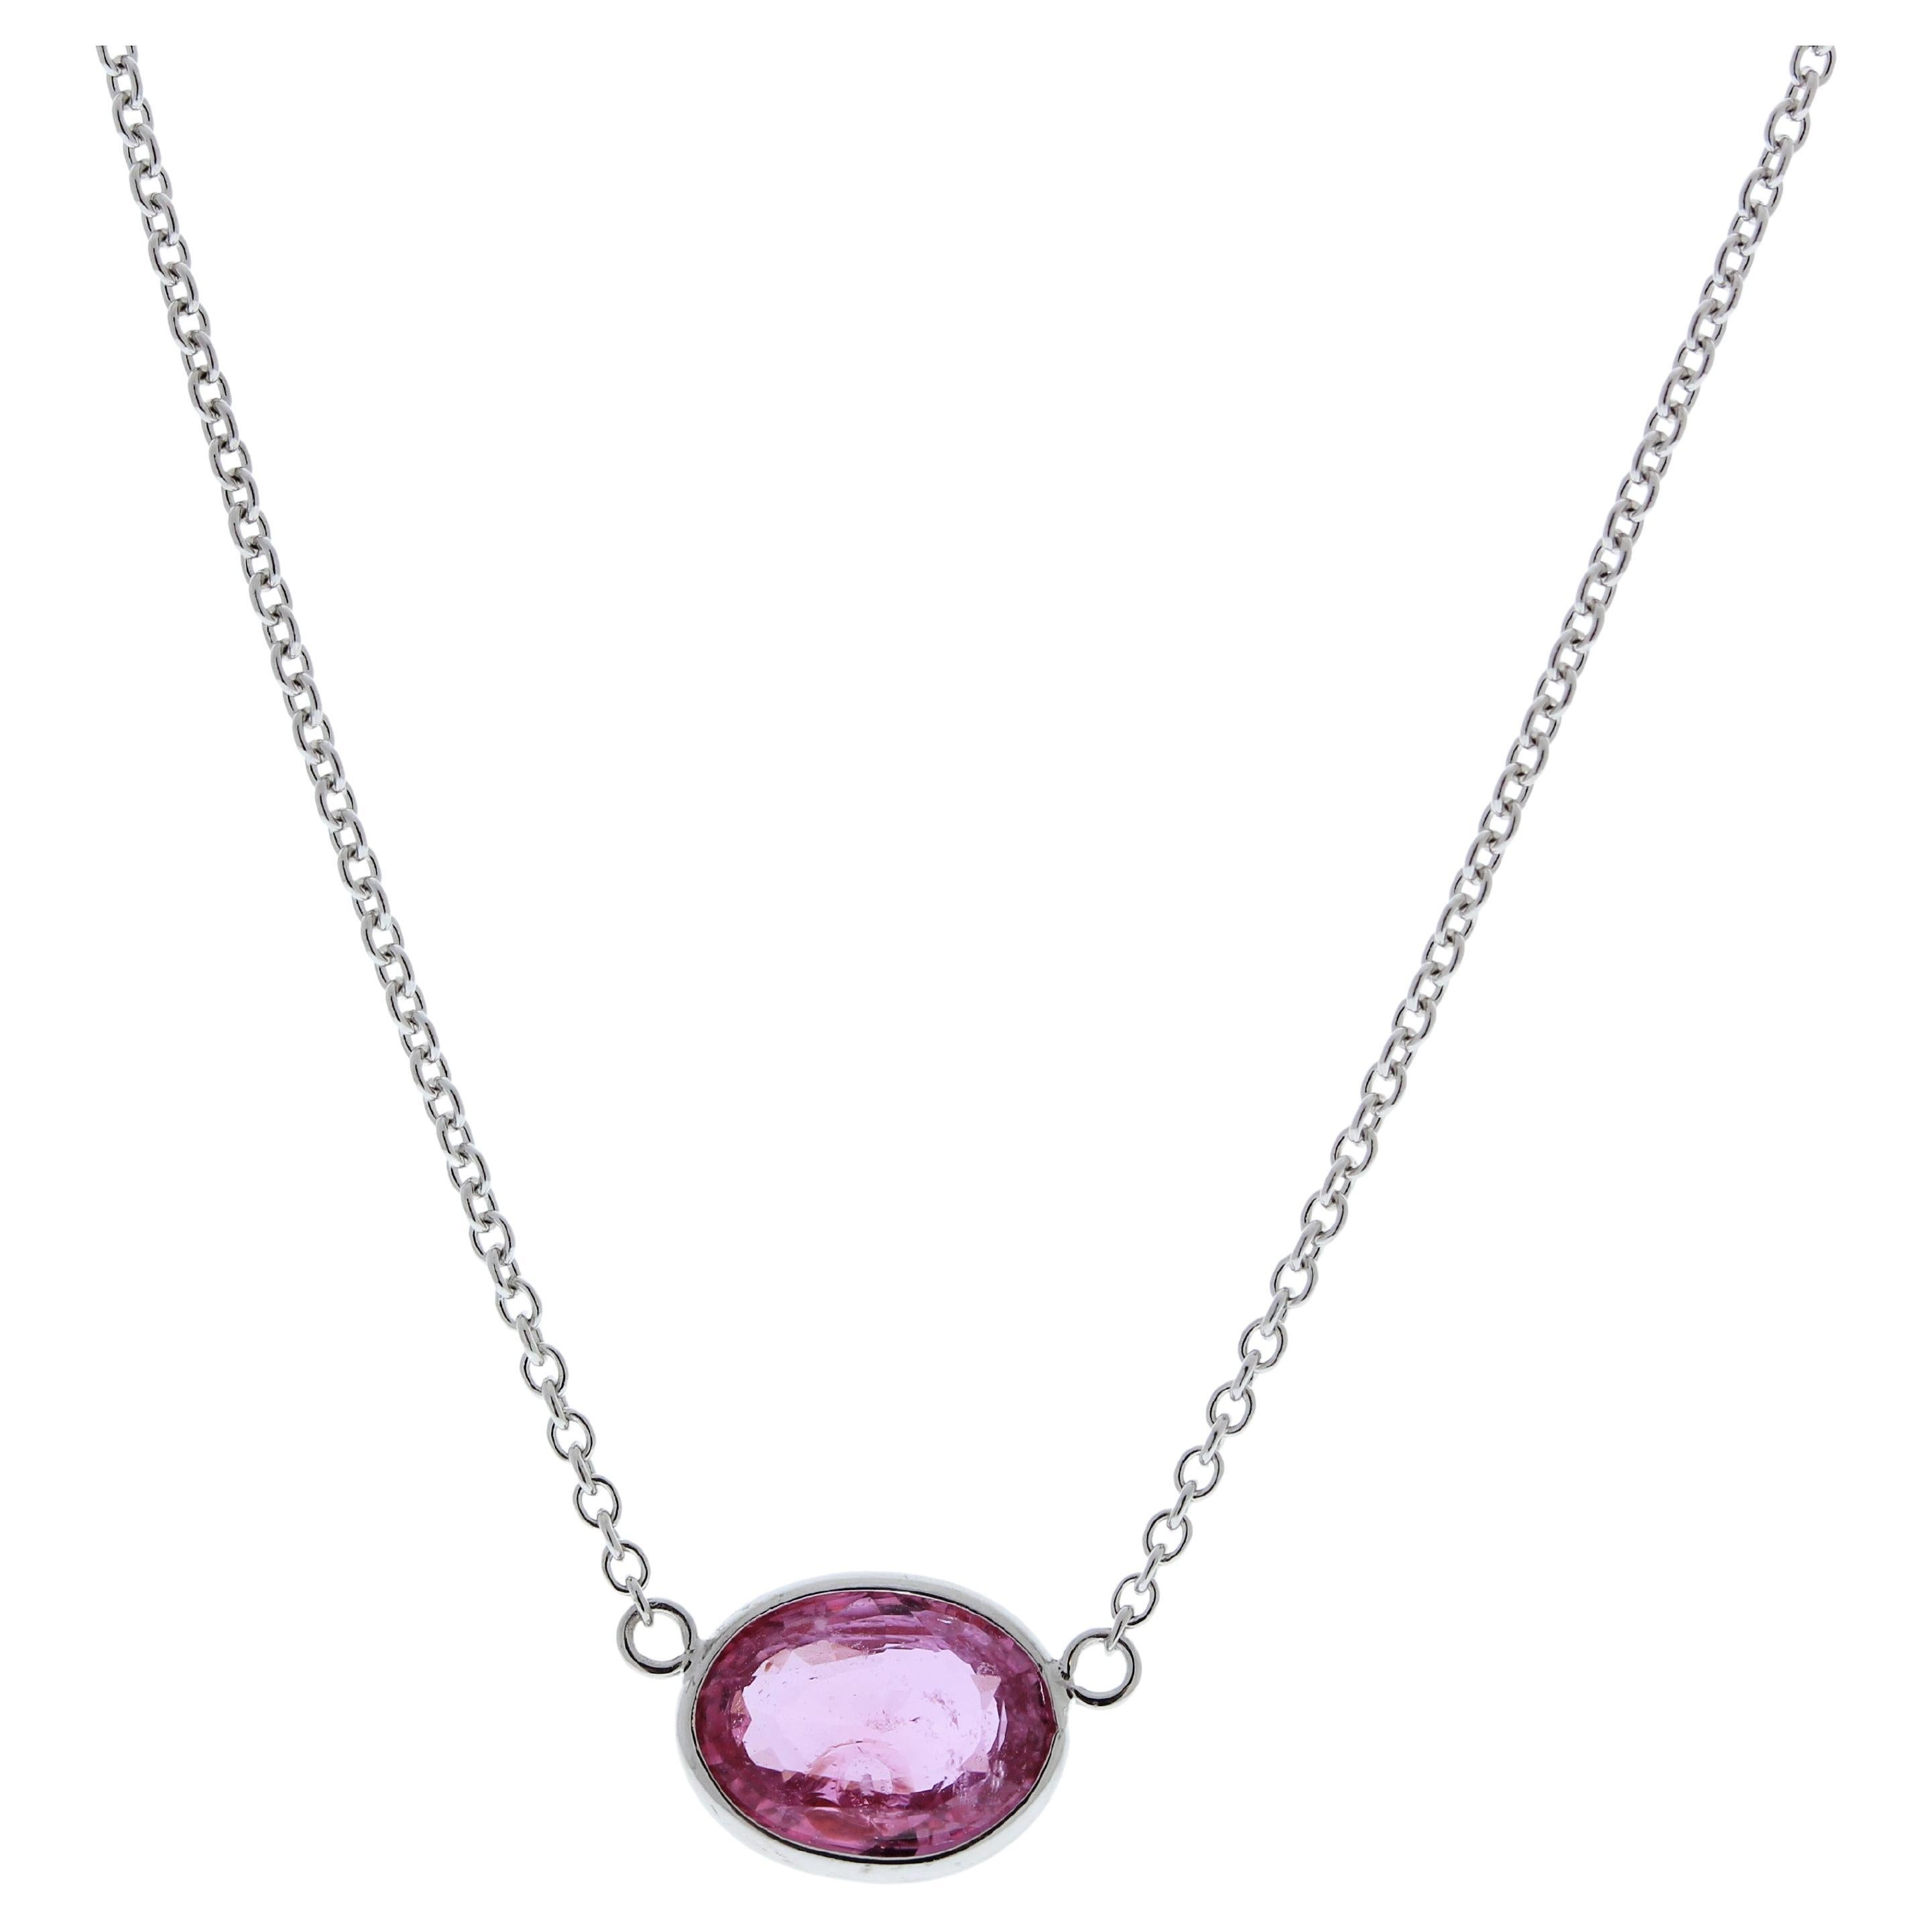 2.15 Carat Oval Padparadschah Pink Fashion Necklaces In 14k White Gold